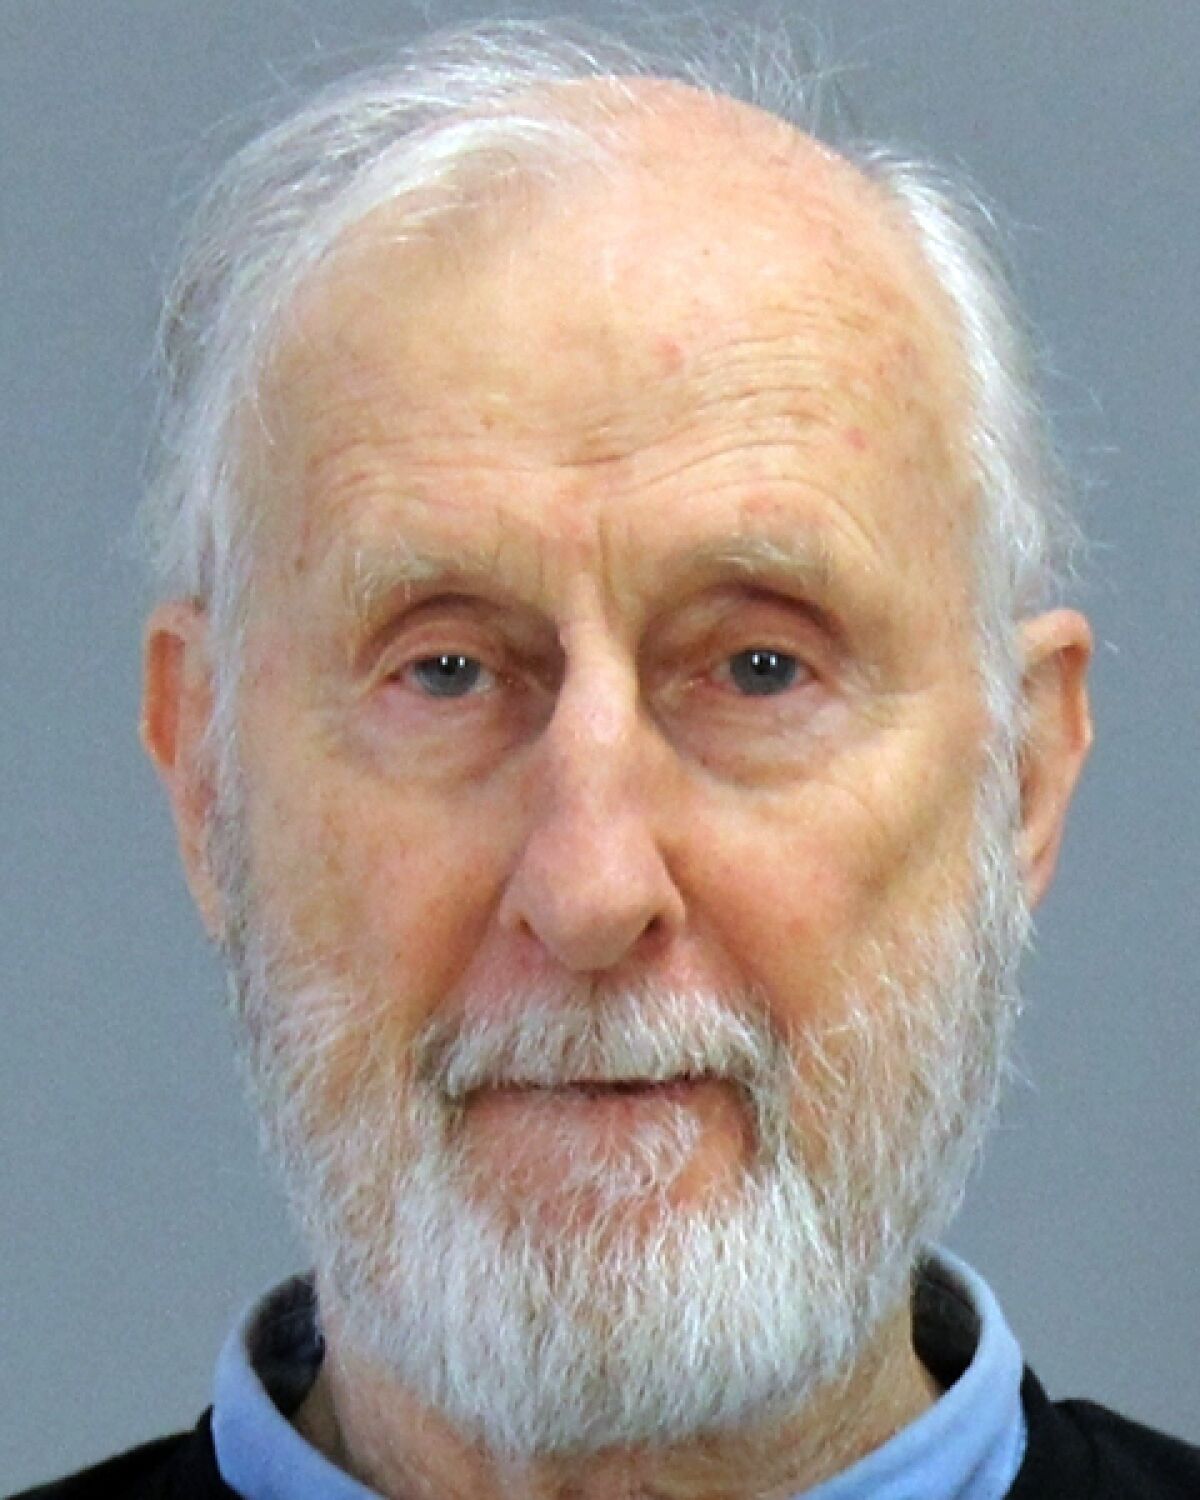 This Thursday, Oct. 31, 2019 photo provided by the Brazos County (Texas) Detention Center shows actor James Cromwell. Actor James Cromwell and Jeremy Beckham have been charged with disorderly conduct after police said they disrupted a meeting of the Texas A&M University System Board of Regents. (Brazos County (Texas) Detention Center via AP)